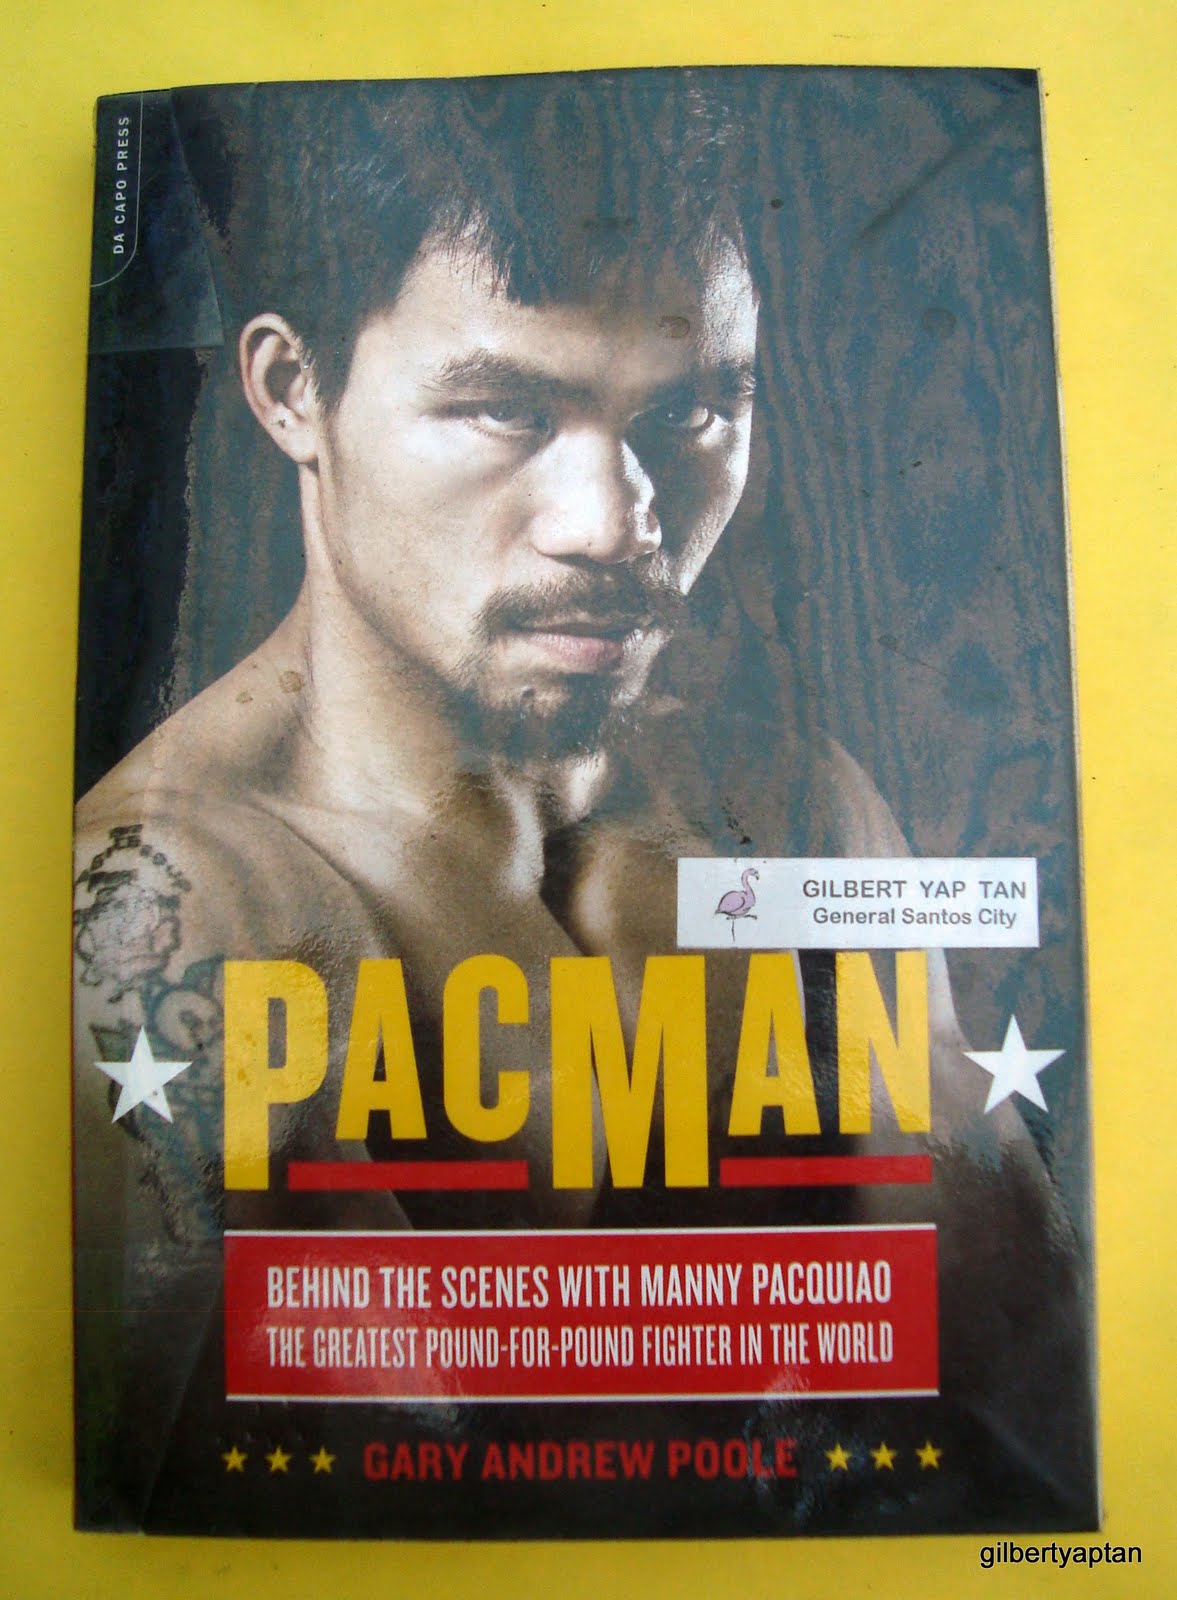 The Bookworm of Gensan: Bookworm of Gensan collects: PacMan books and ...